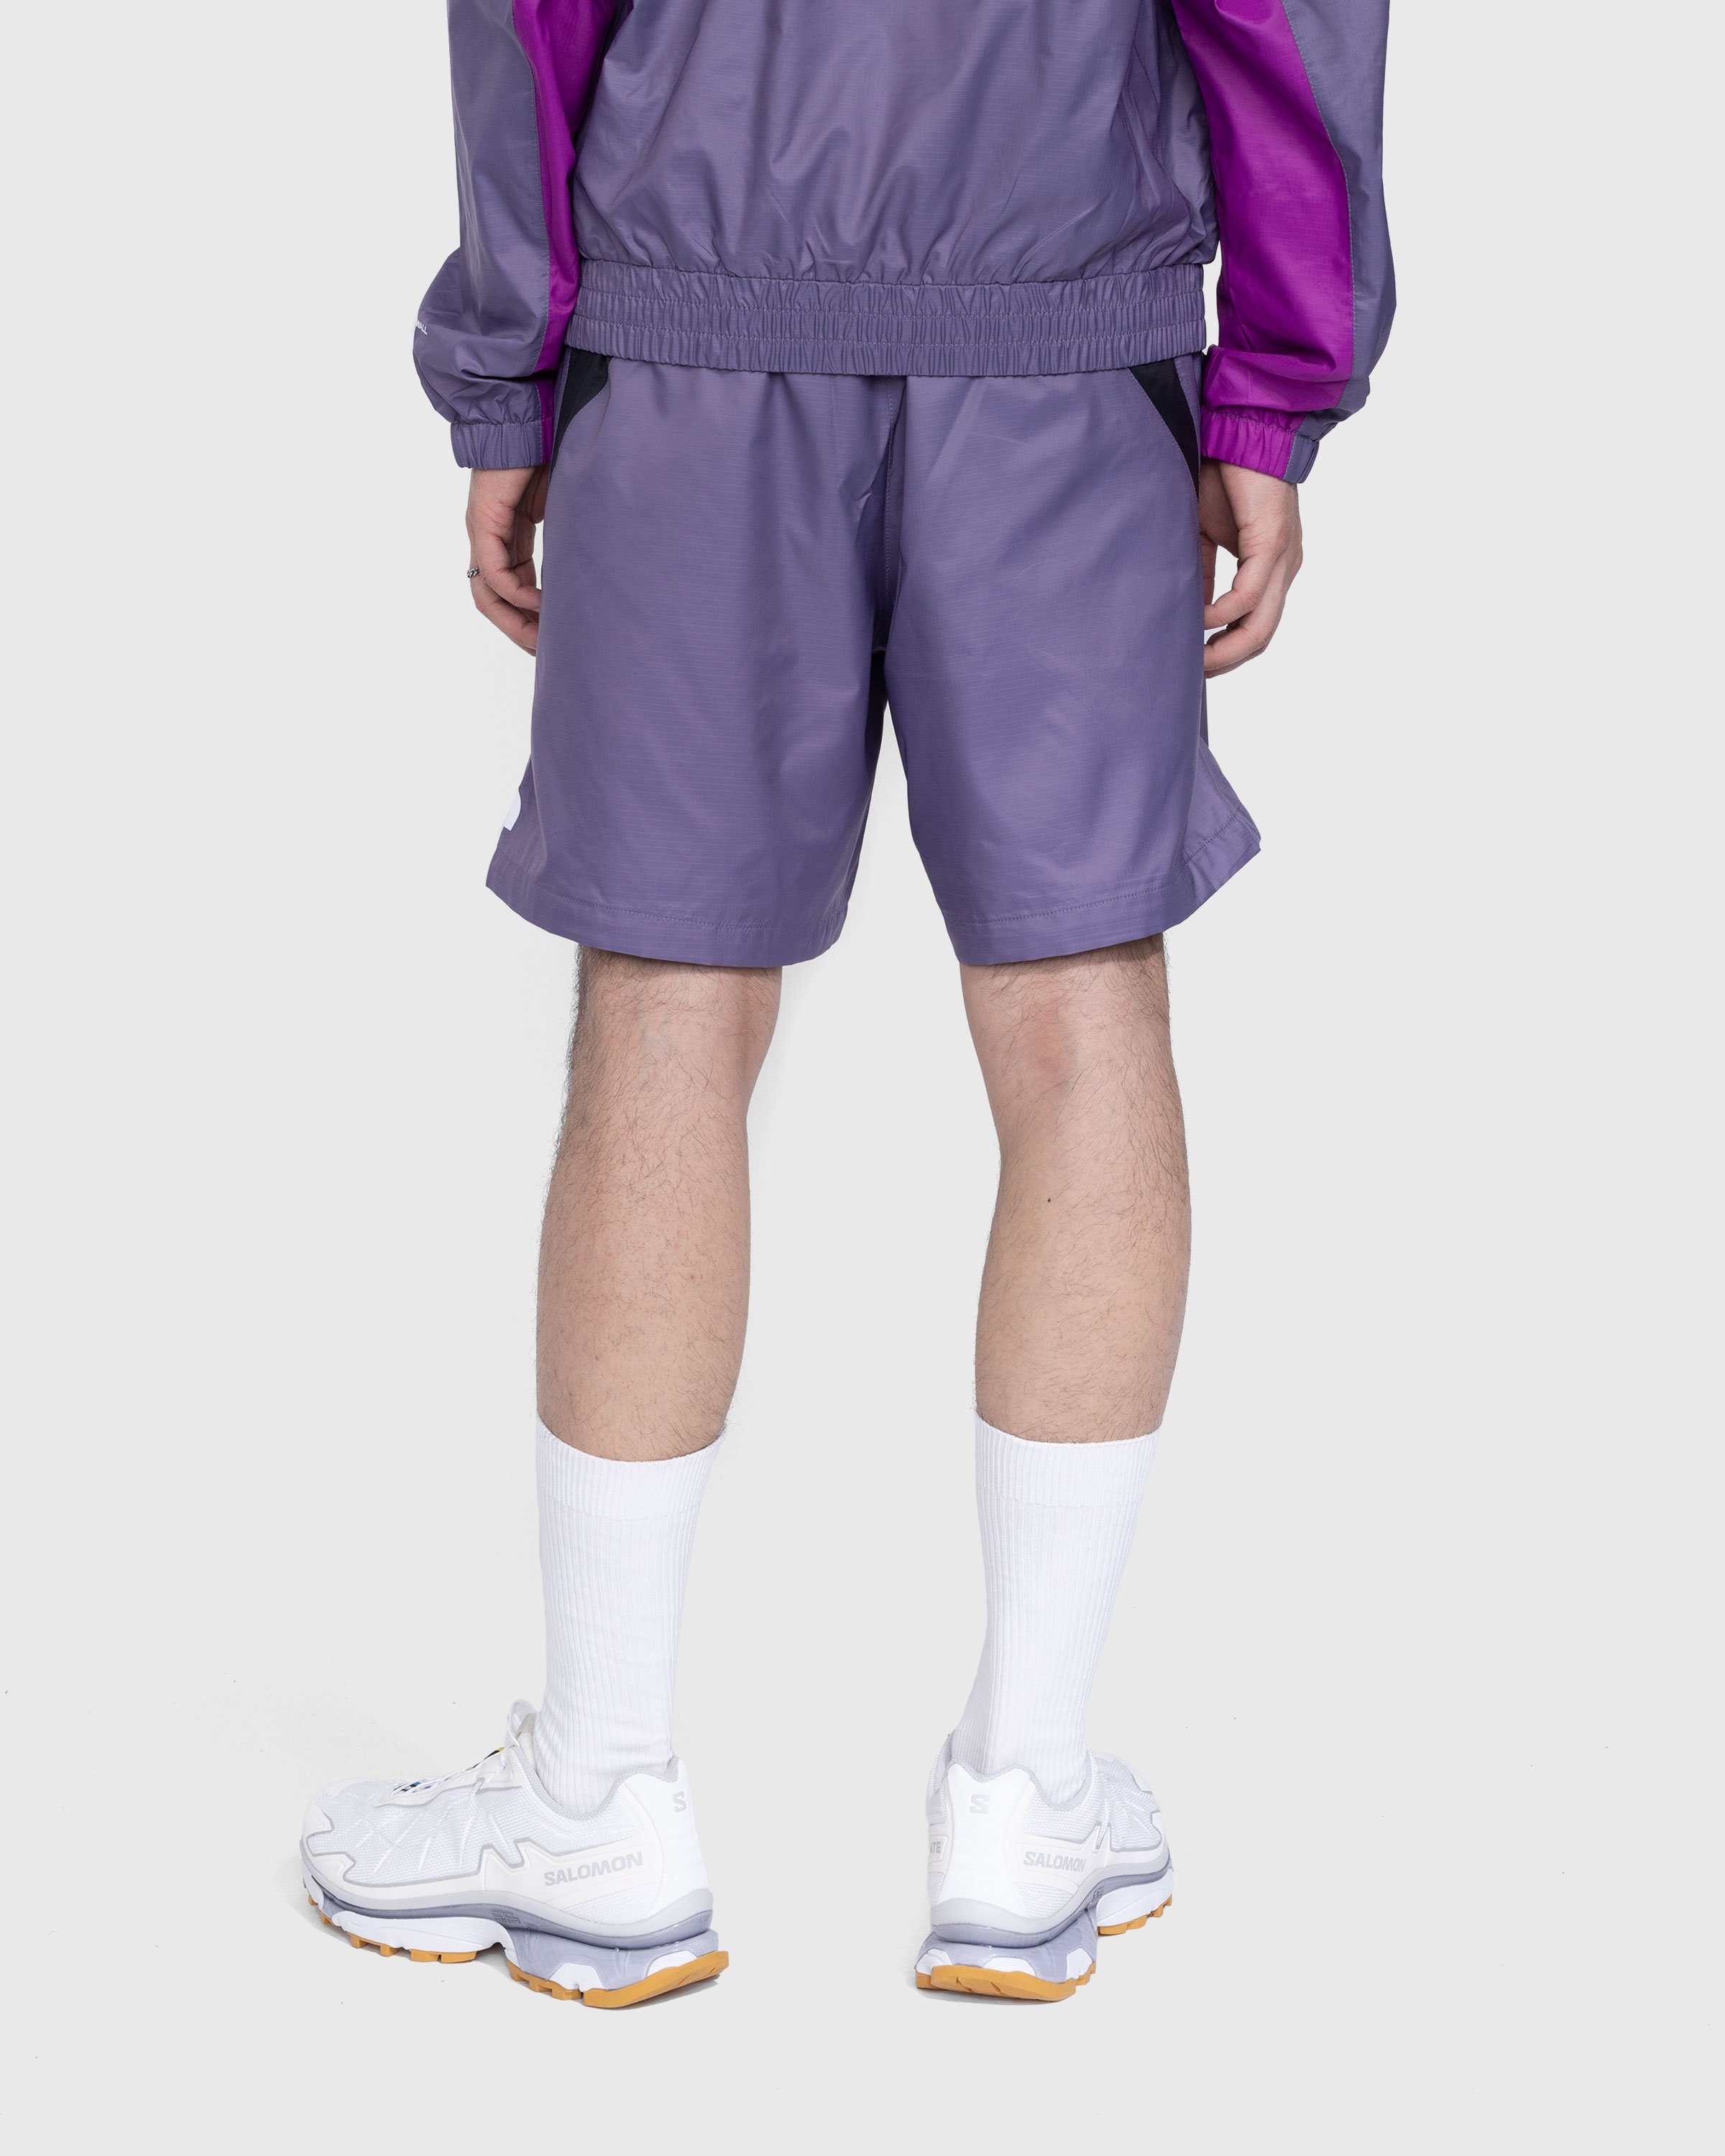 The North Face – TNF X Shorts Purple - Shorts - Blue - Image 3